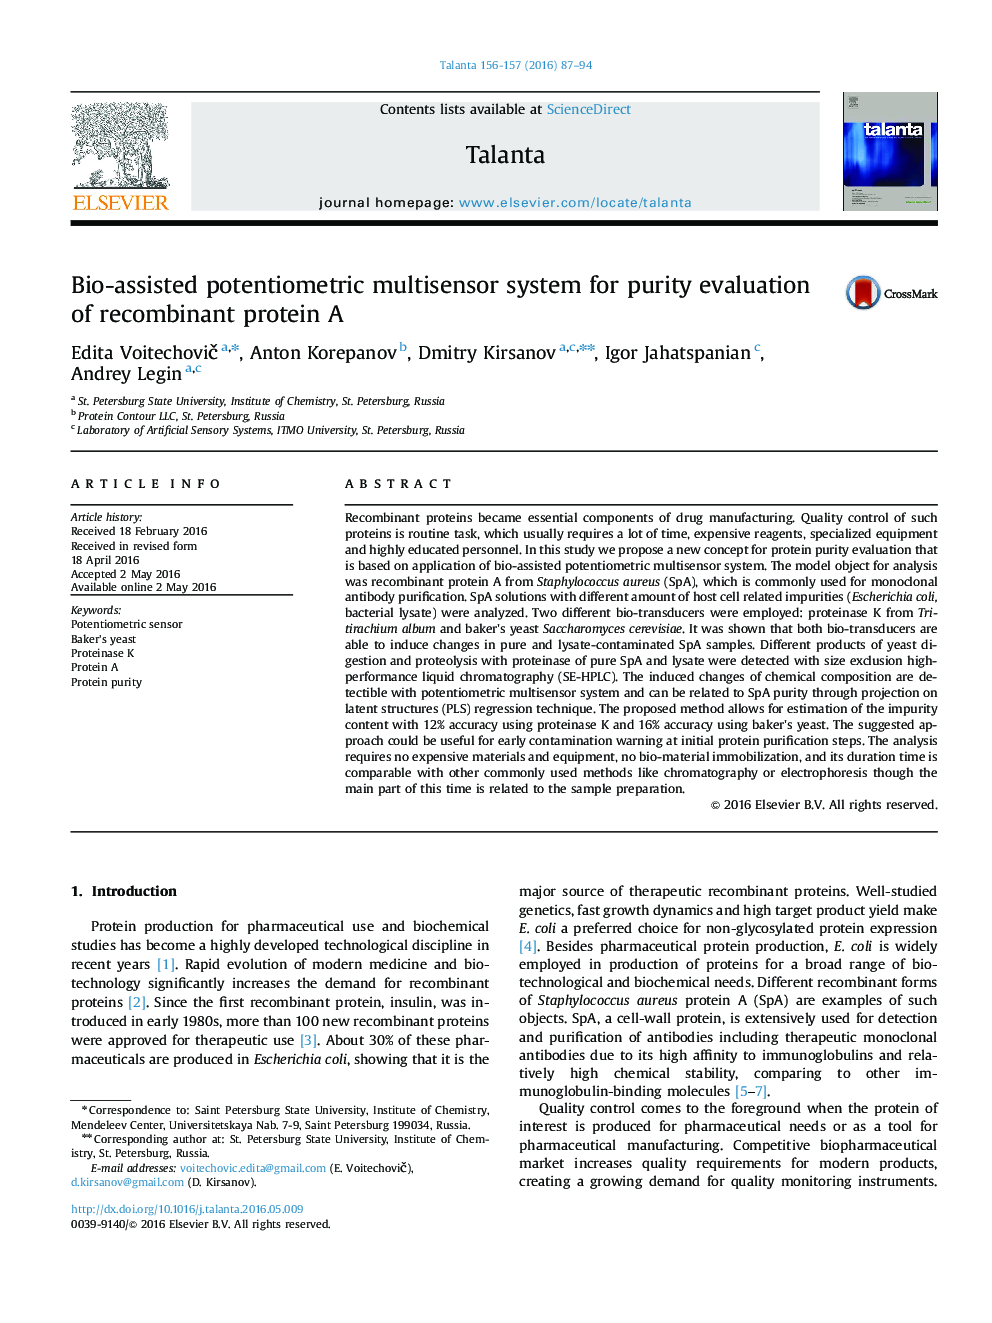 Bio-assisted potentiometric multisensor system for purity evaluation of recombinant protein A